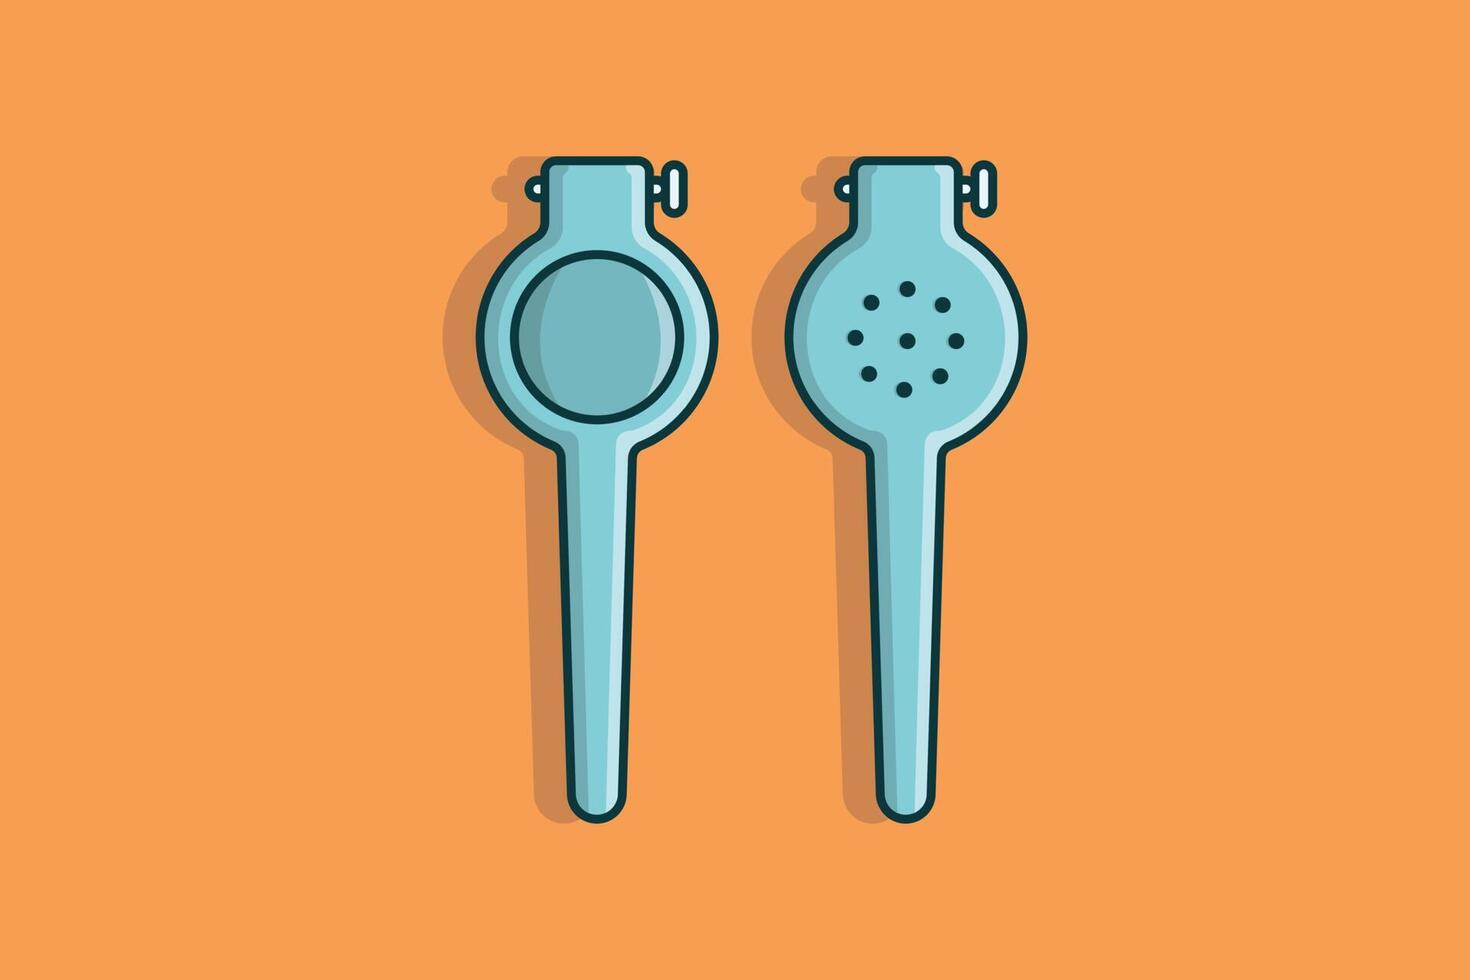 Lemon Squeezer front and Back view vector illustration. Kitchen and Restaurant interior equipment icon concept. Fruit juice squeezer kitchen appliance vector design with shadow.